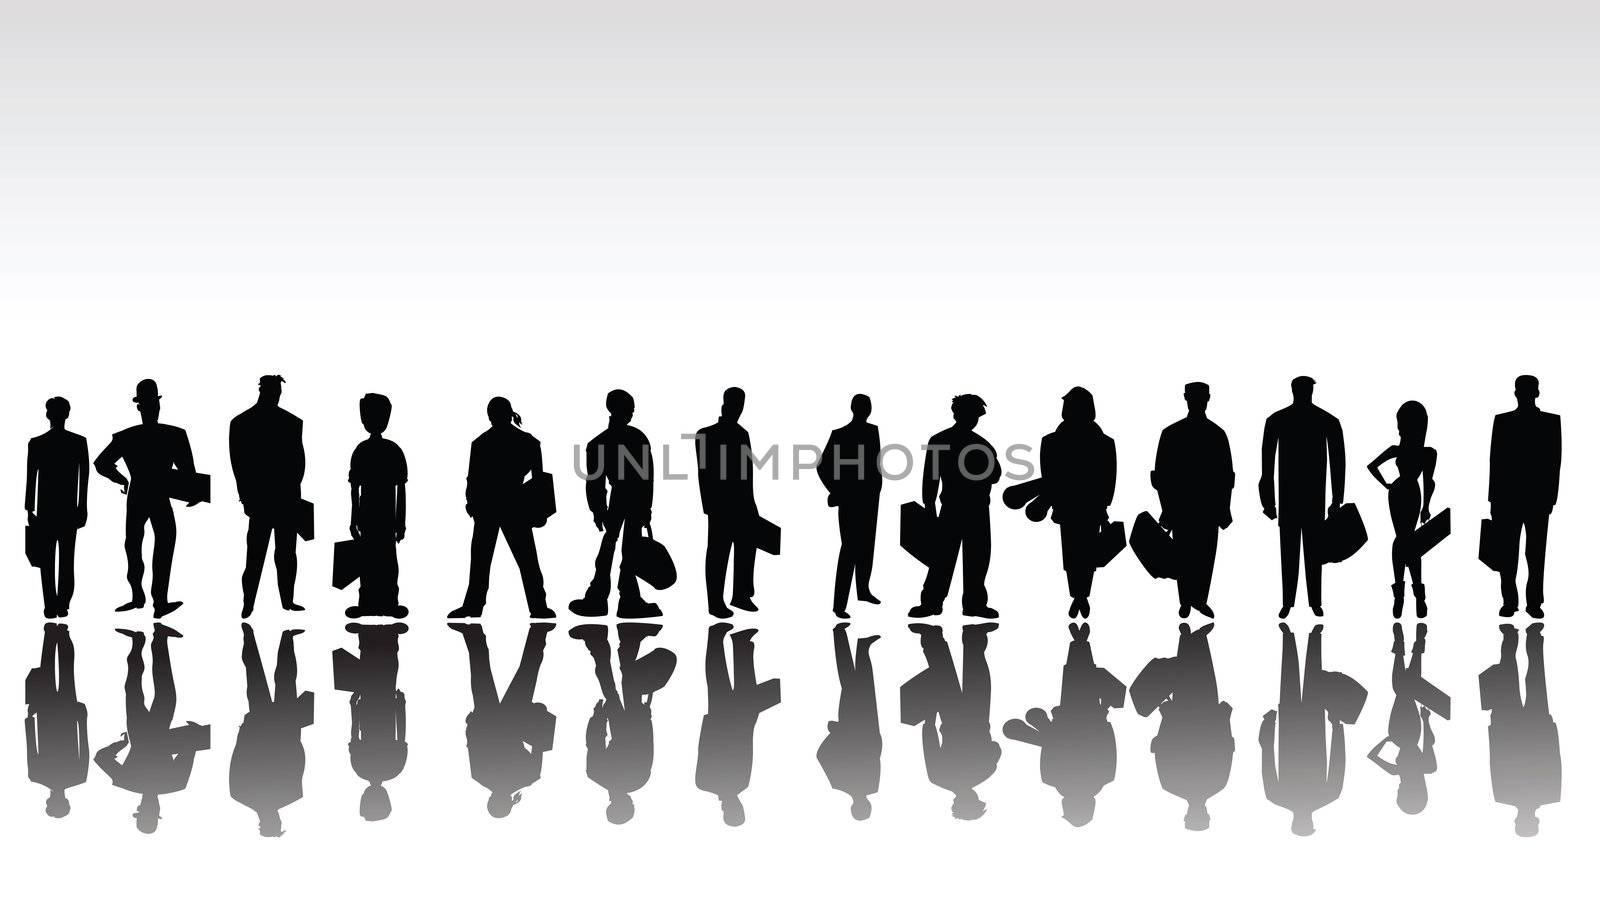 Sketch with Stylized business people silhouettes